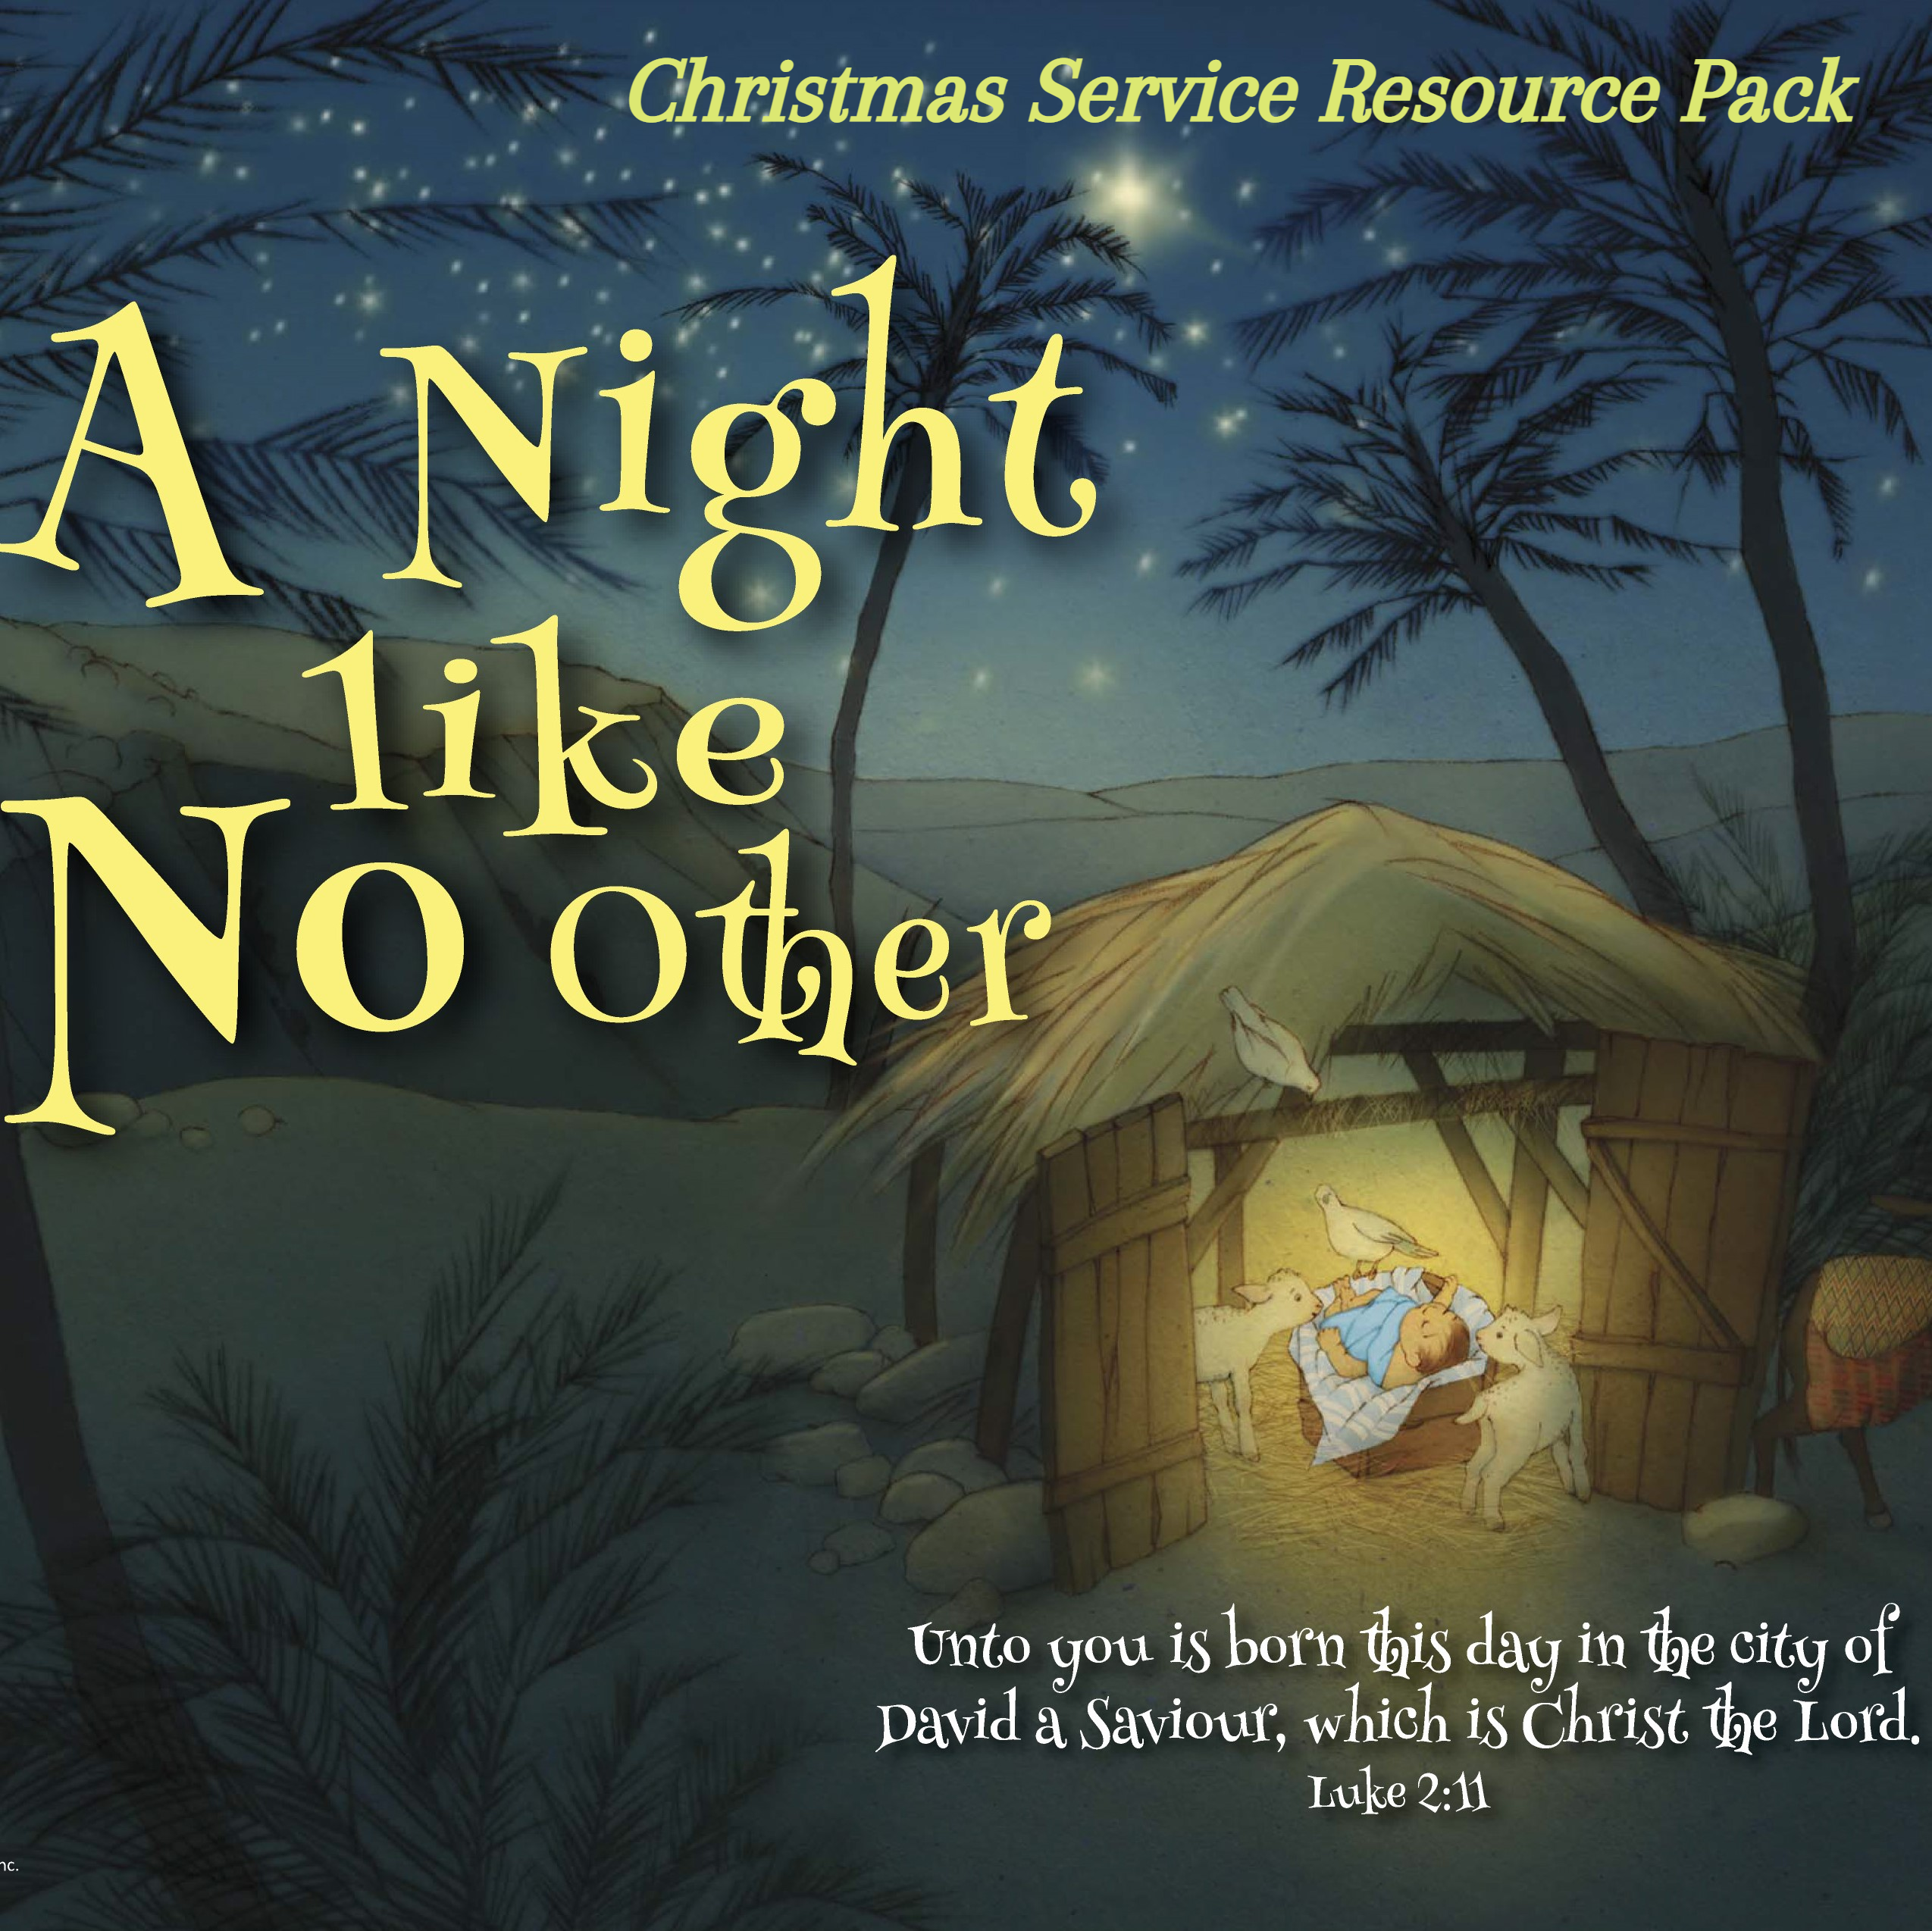 Christmas Service Resource Pack - A Night like No Other